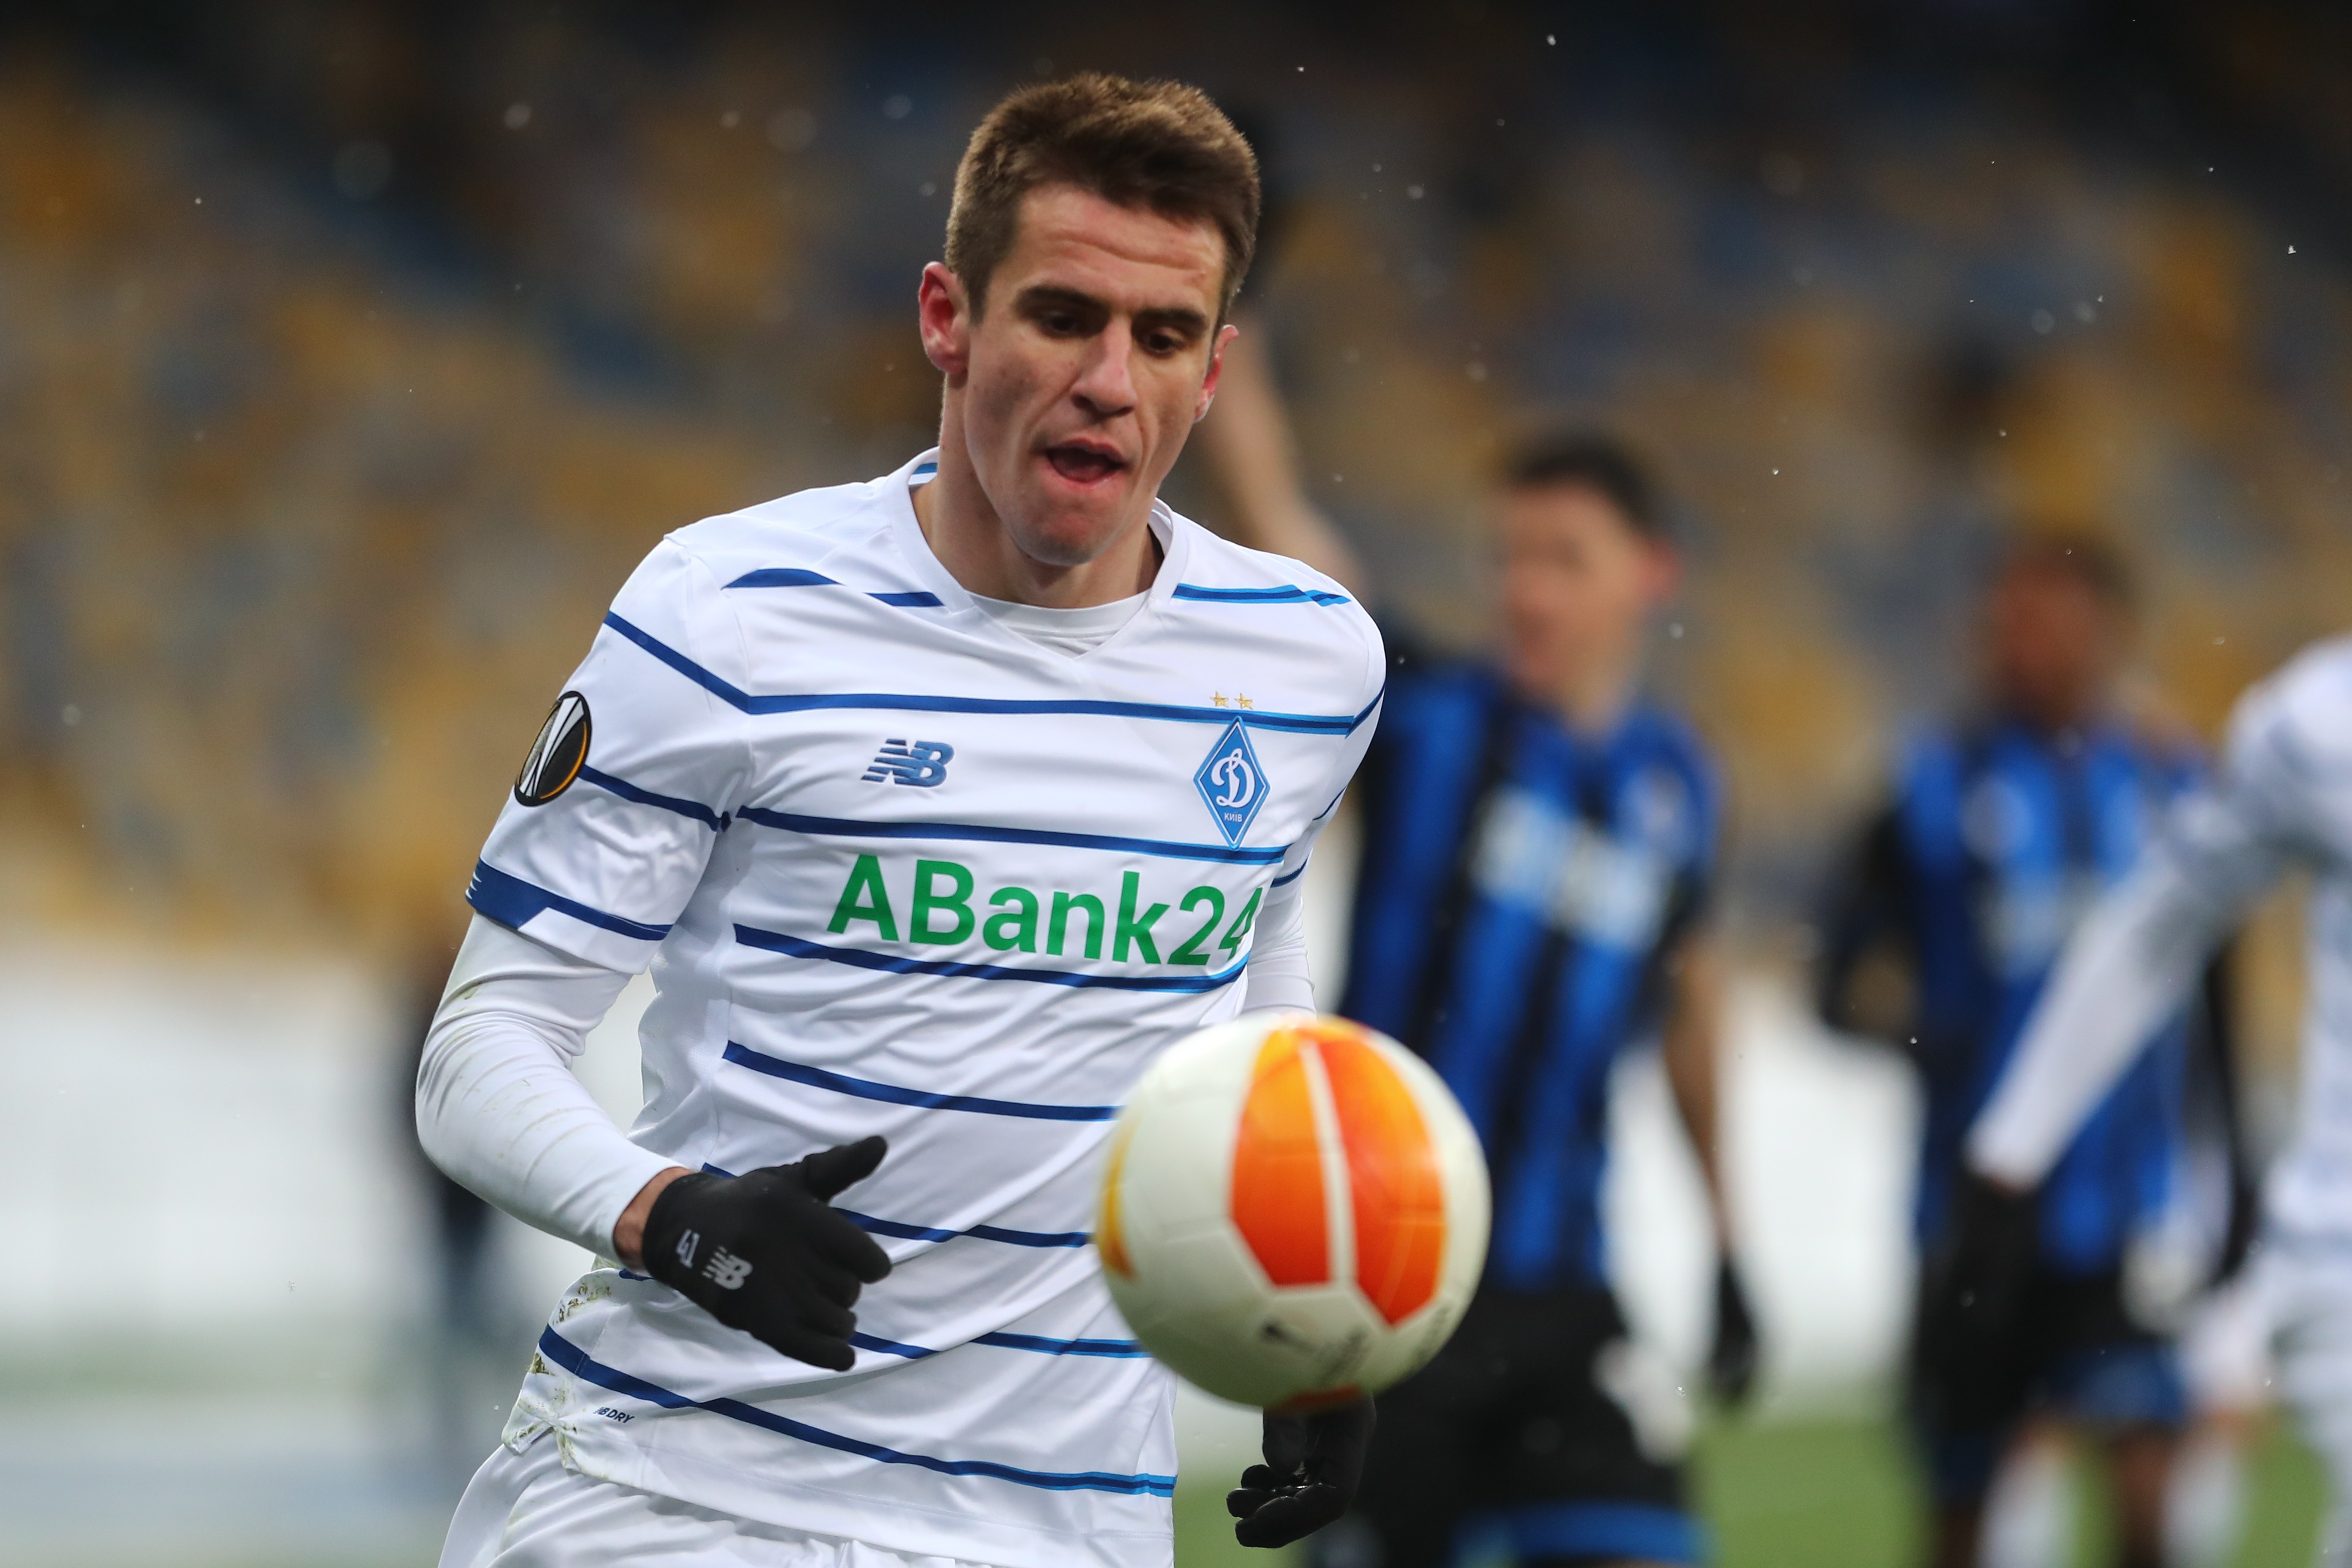 Artem Besedin: “We need to draw conclusions and get ready for away match”